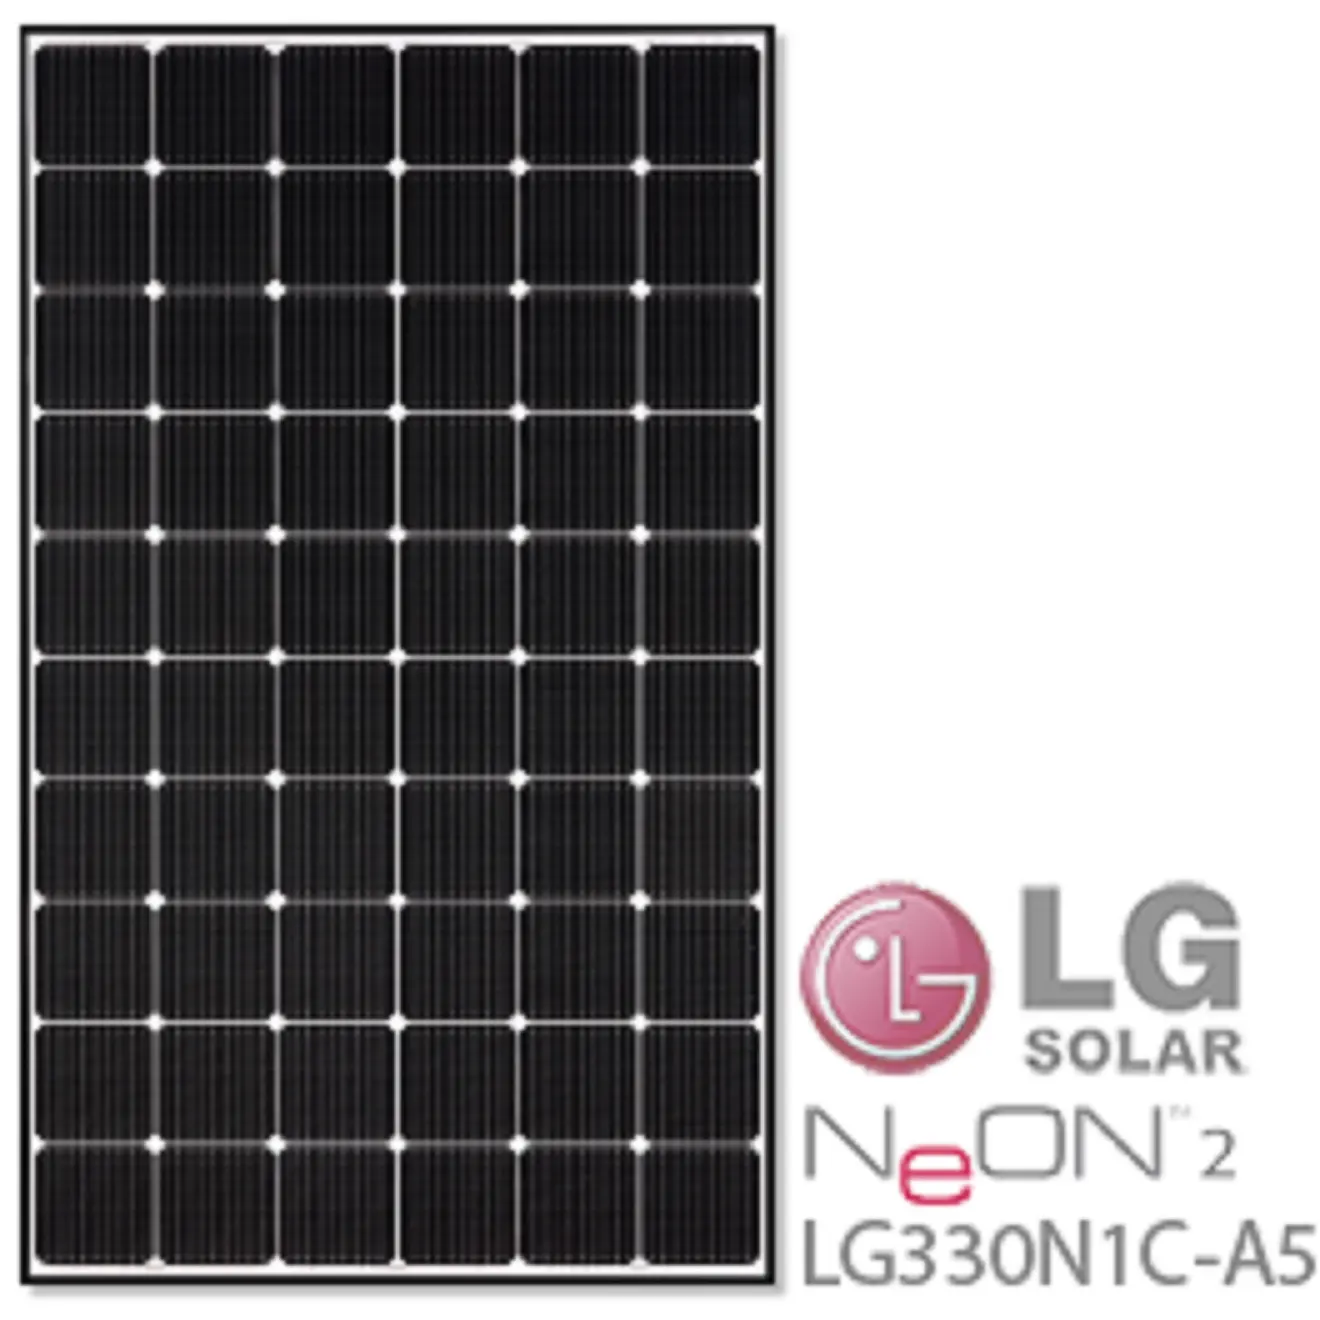 LG NeON 2 LG330N1C-A5 Solar Panel Review